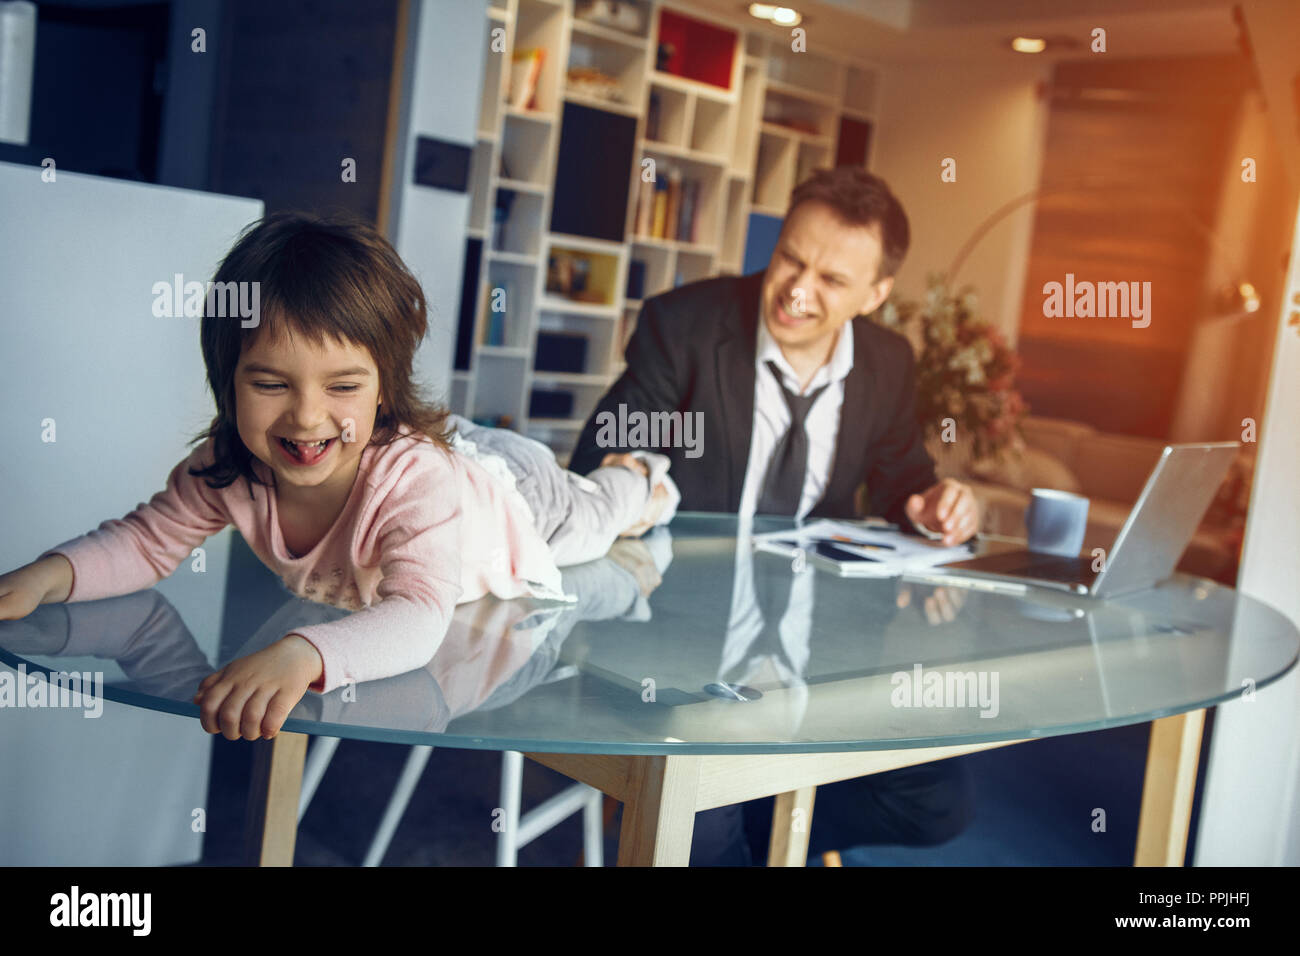 Daughter helping father working at home Stock Photo